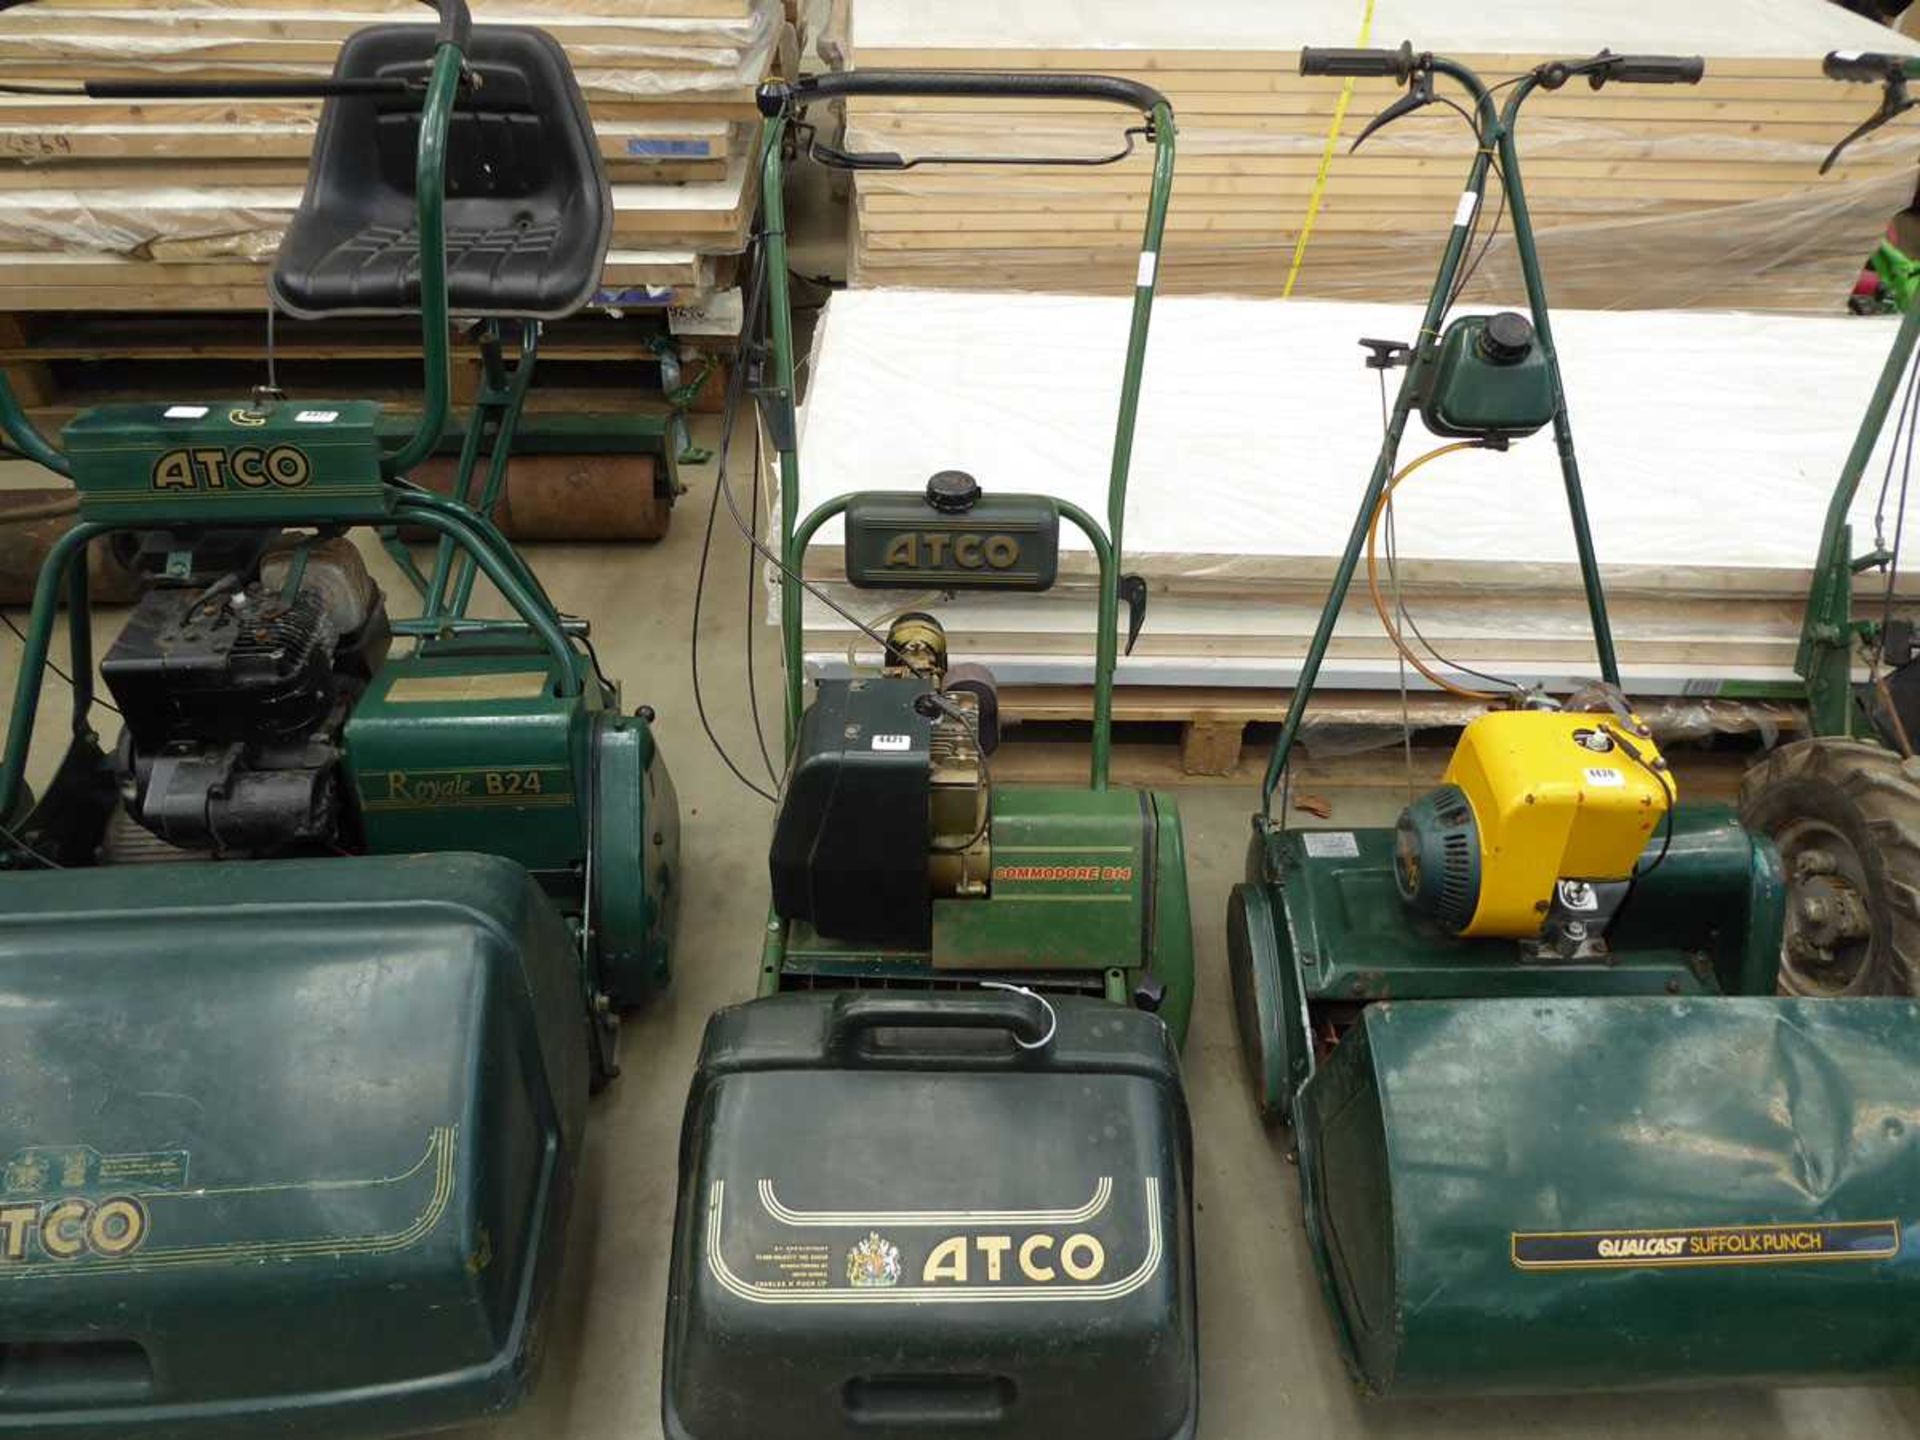 Atco commodore B14 petrol powered cylinder mower with grass box